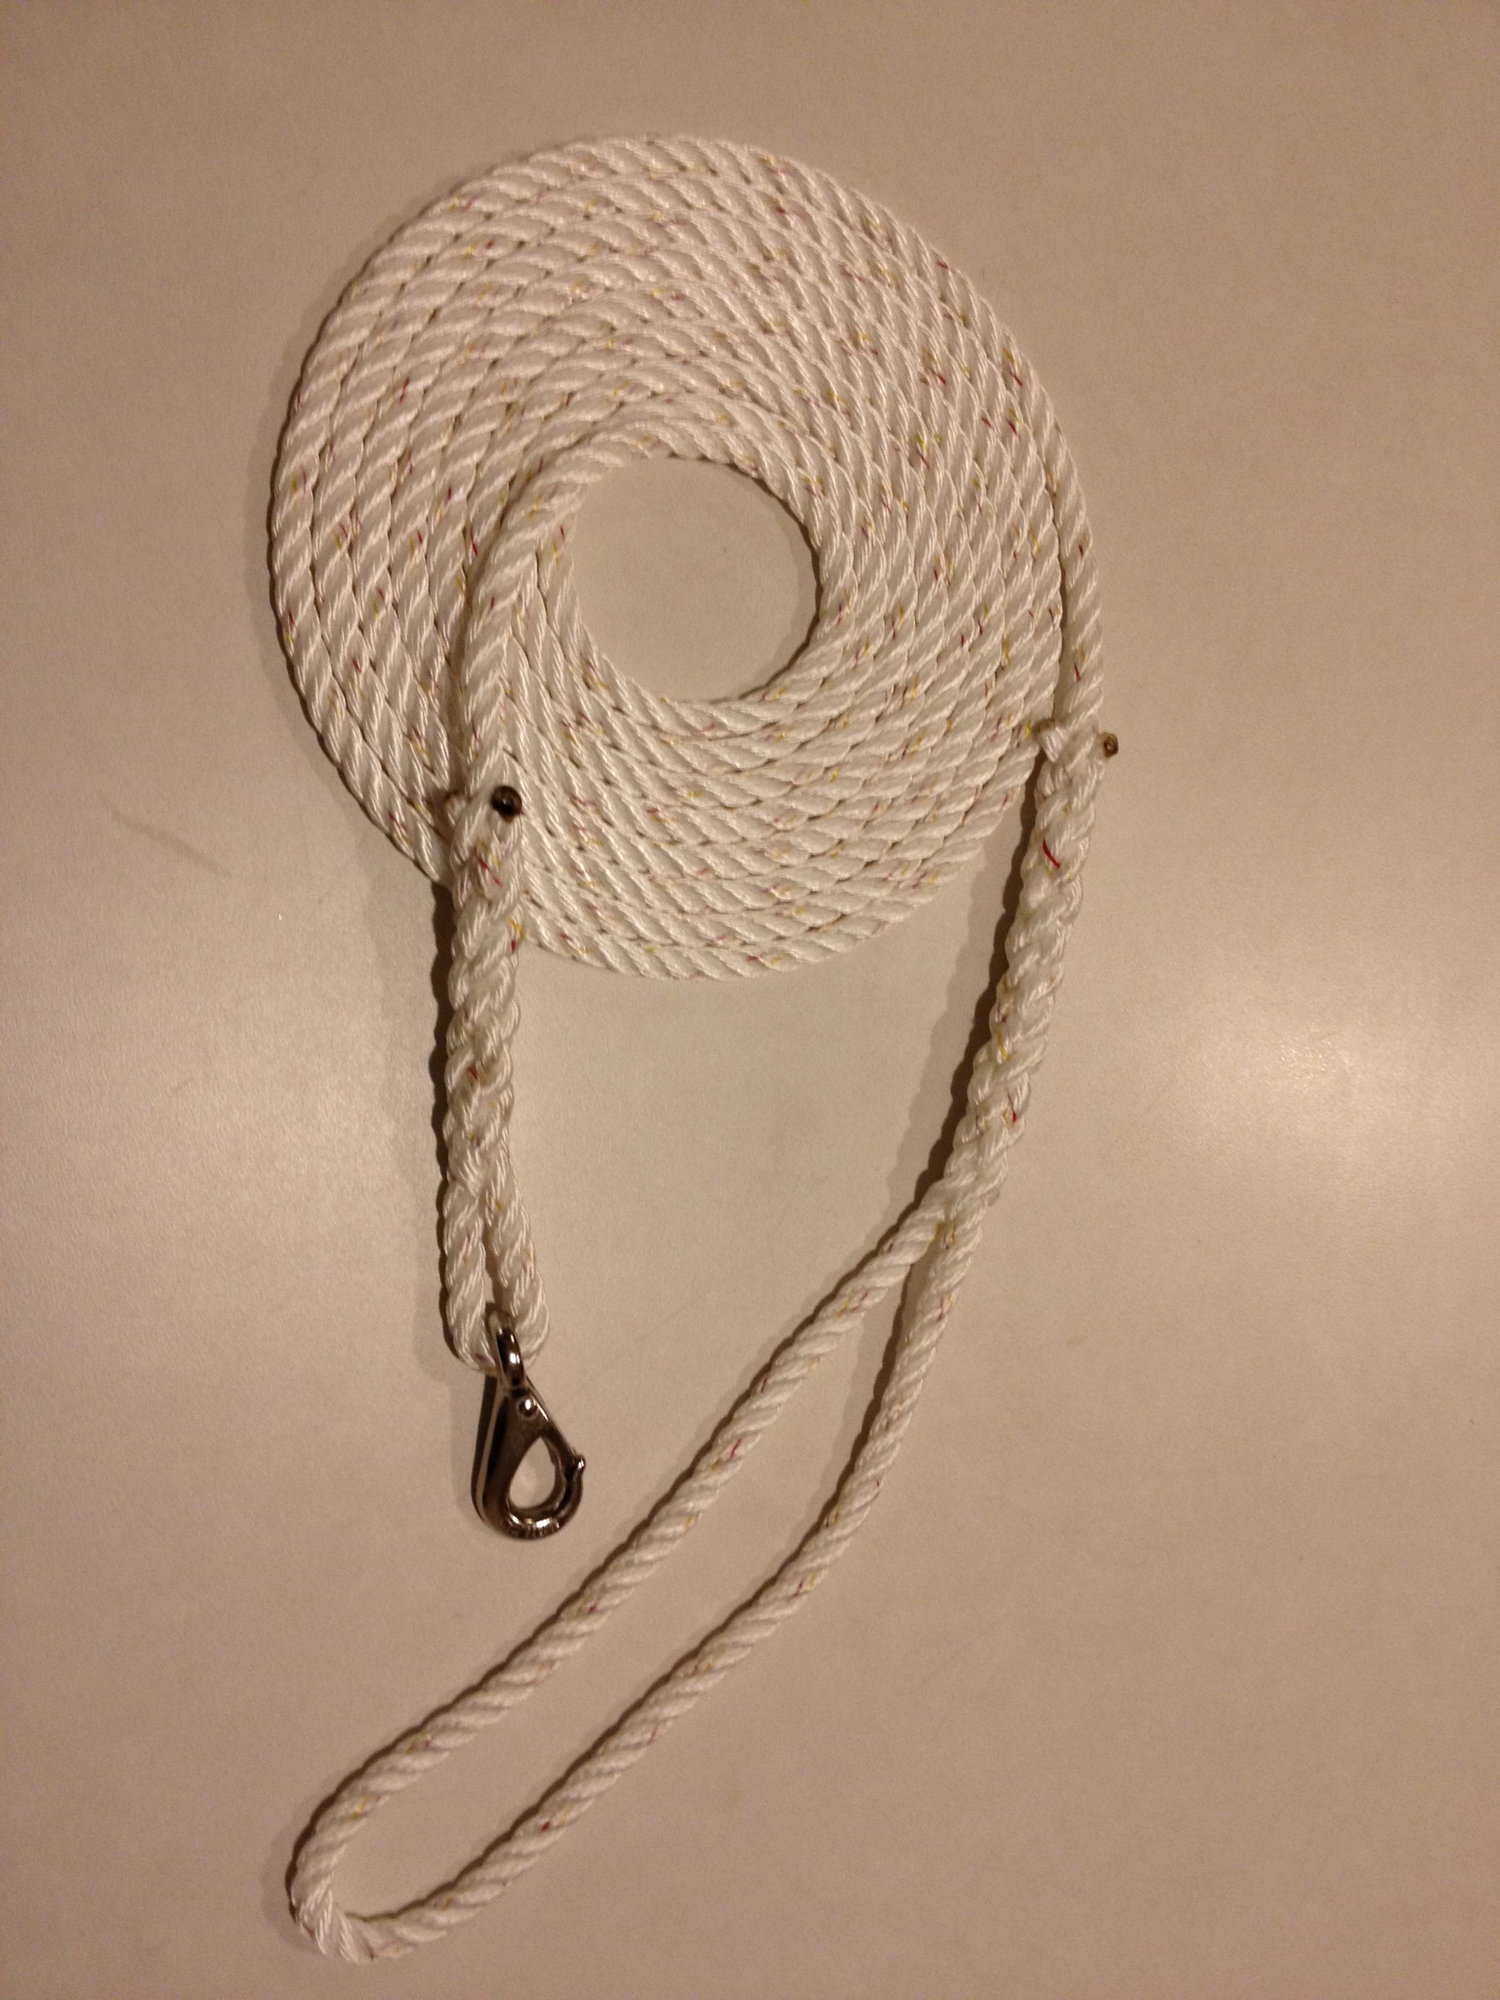 Rod leashes 6' $16.99 each,shipping is free - The Hull Truth - Boating and  Fishing Forum